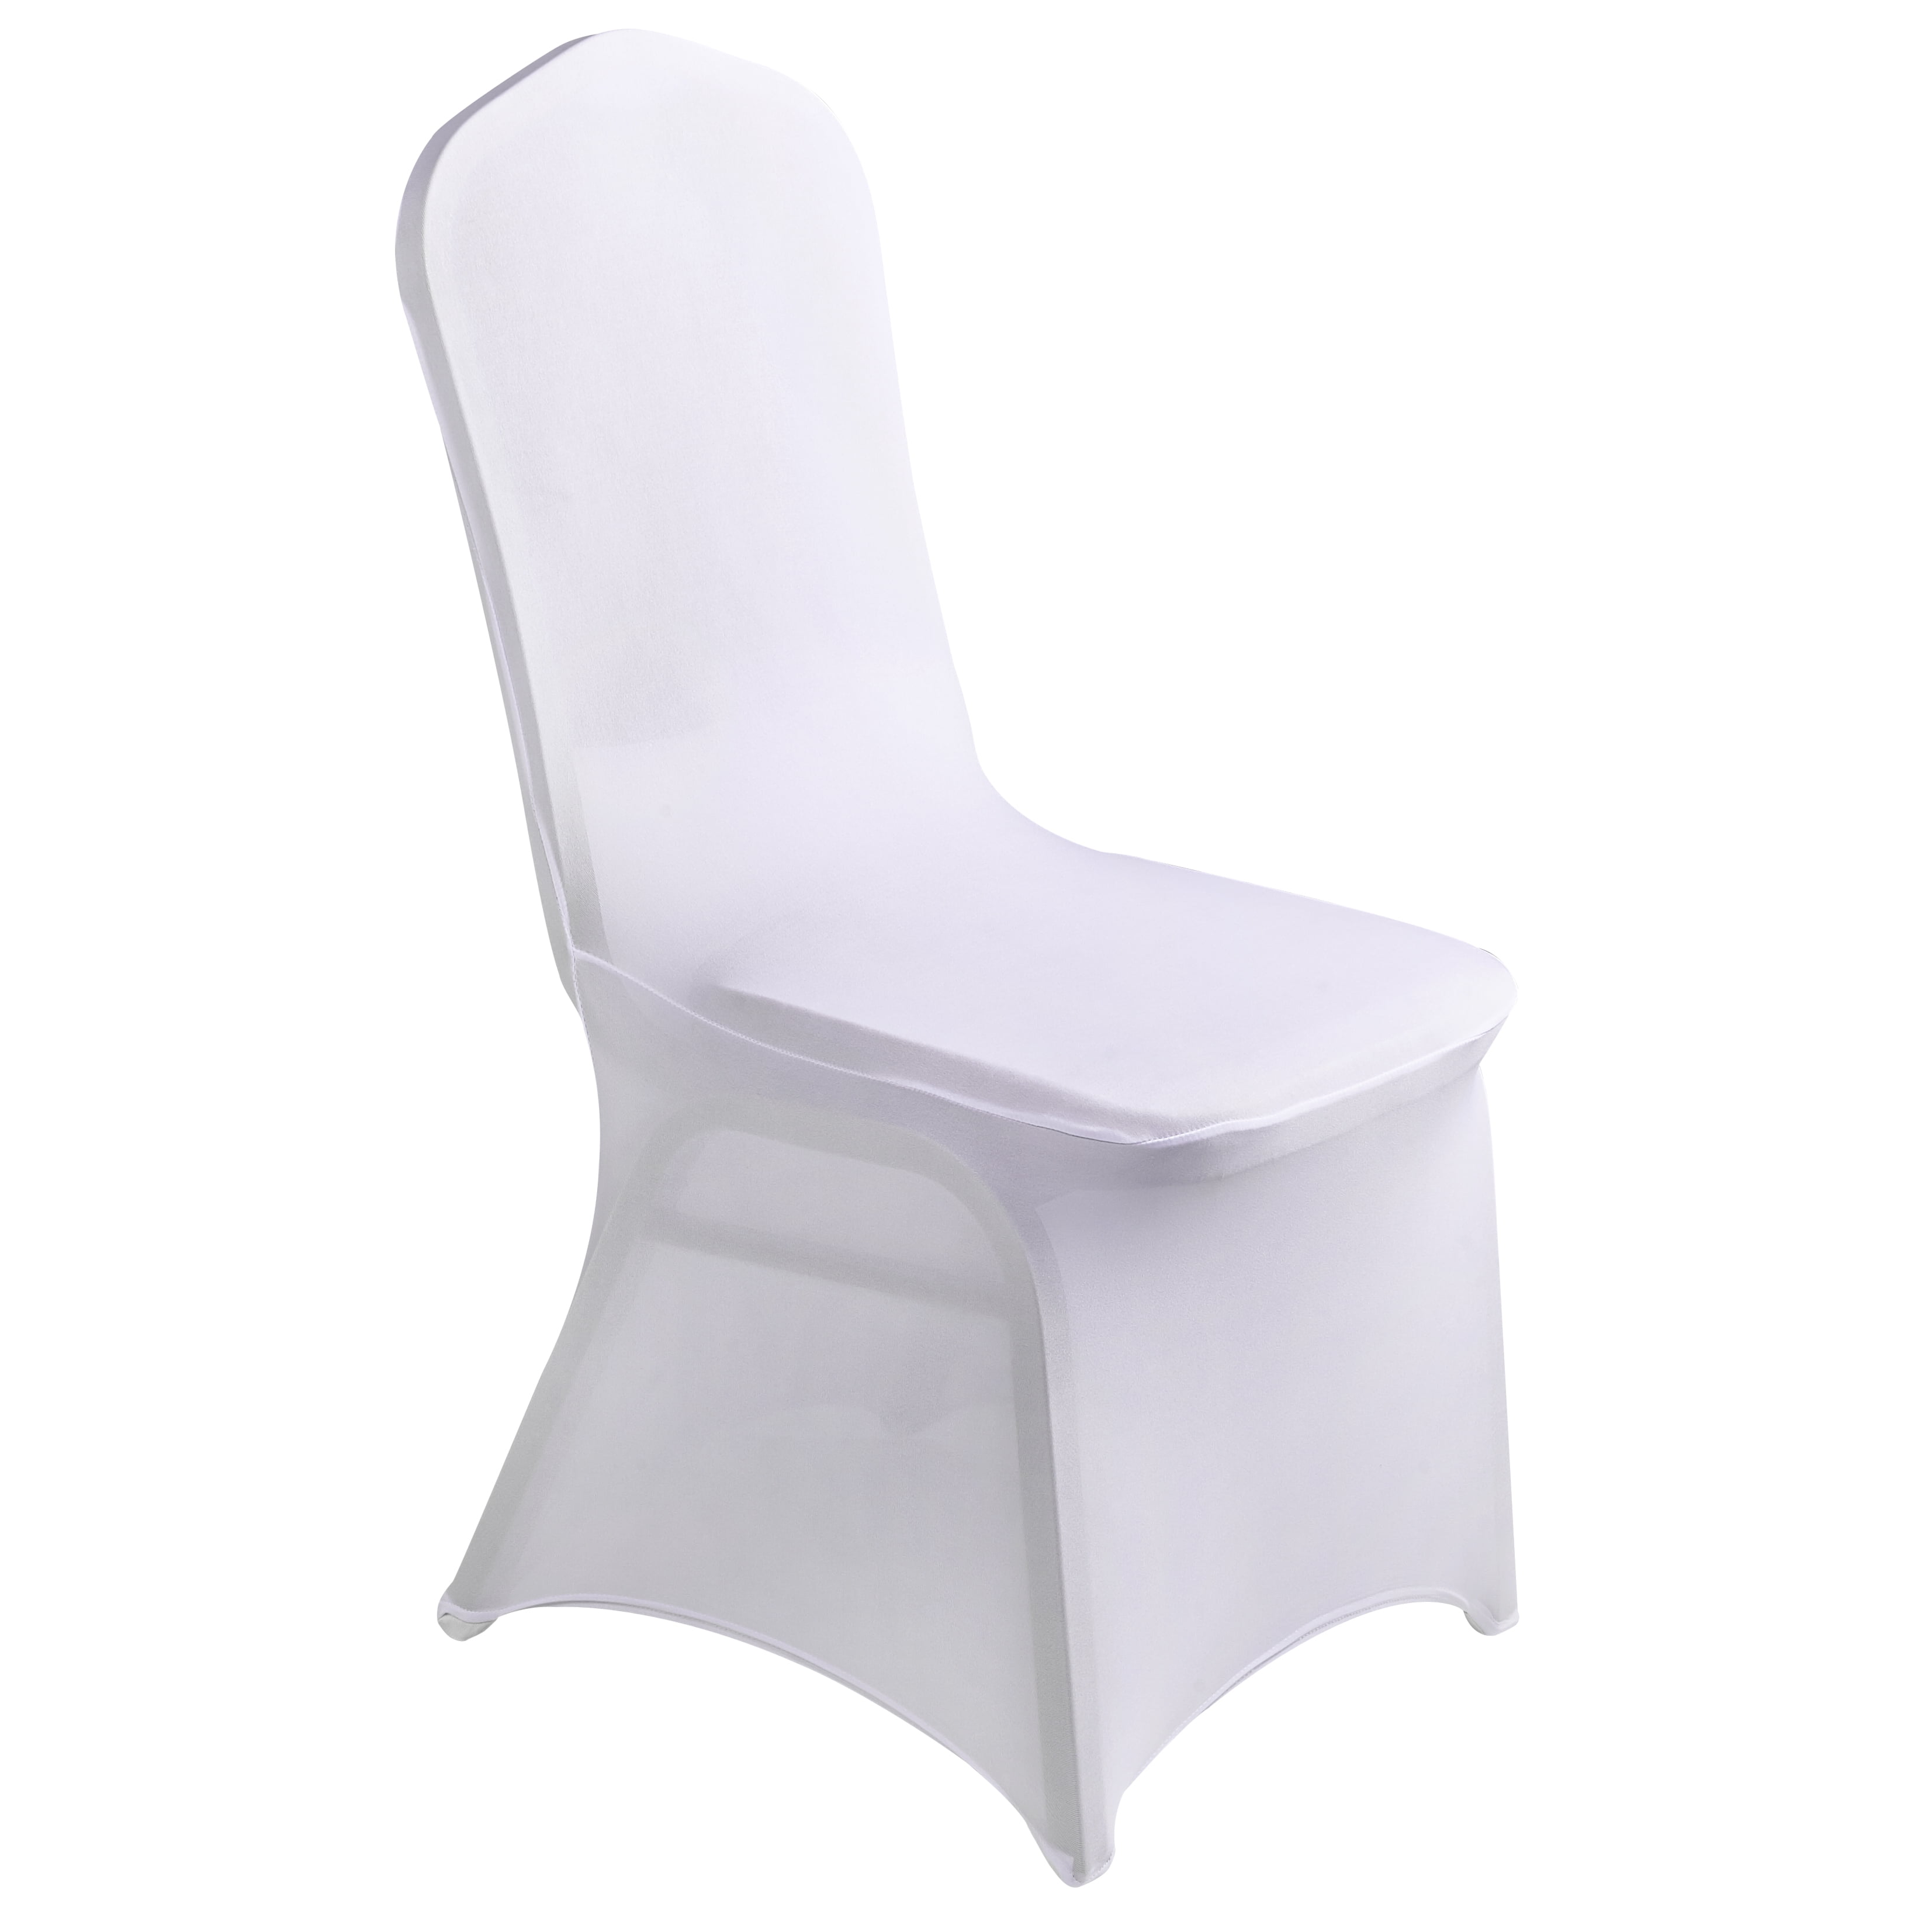 50 pc White Spandex Folding Chair Covers Wedding Reception wc 